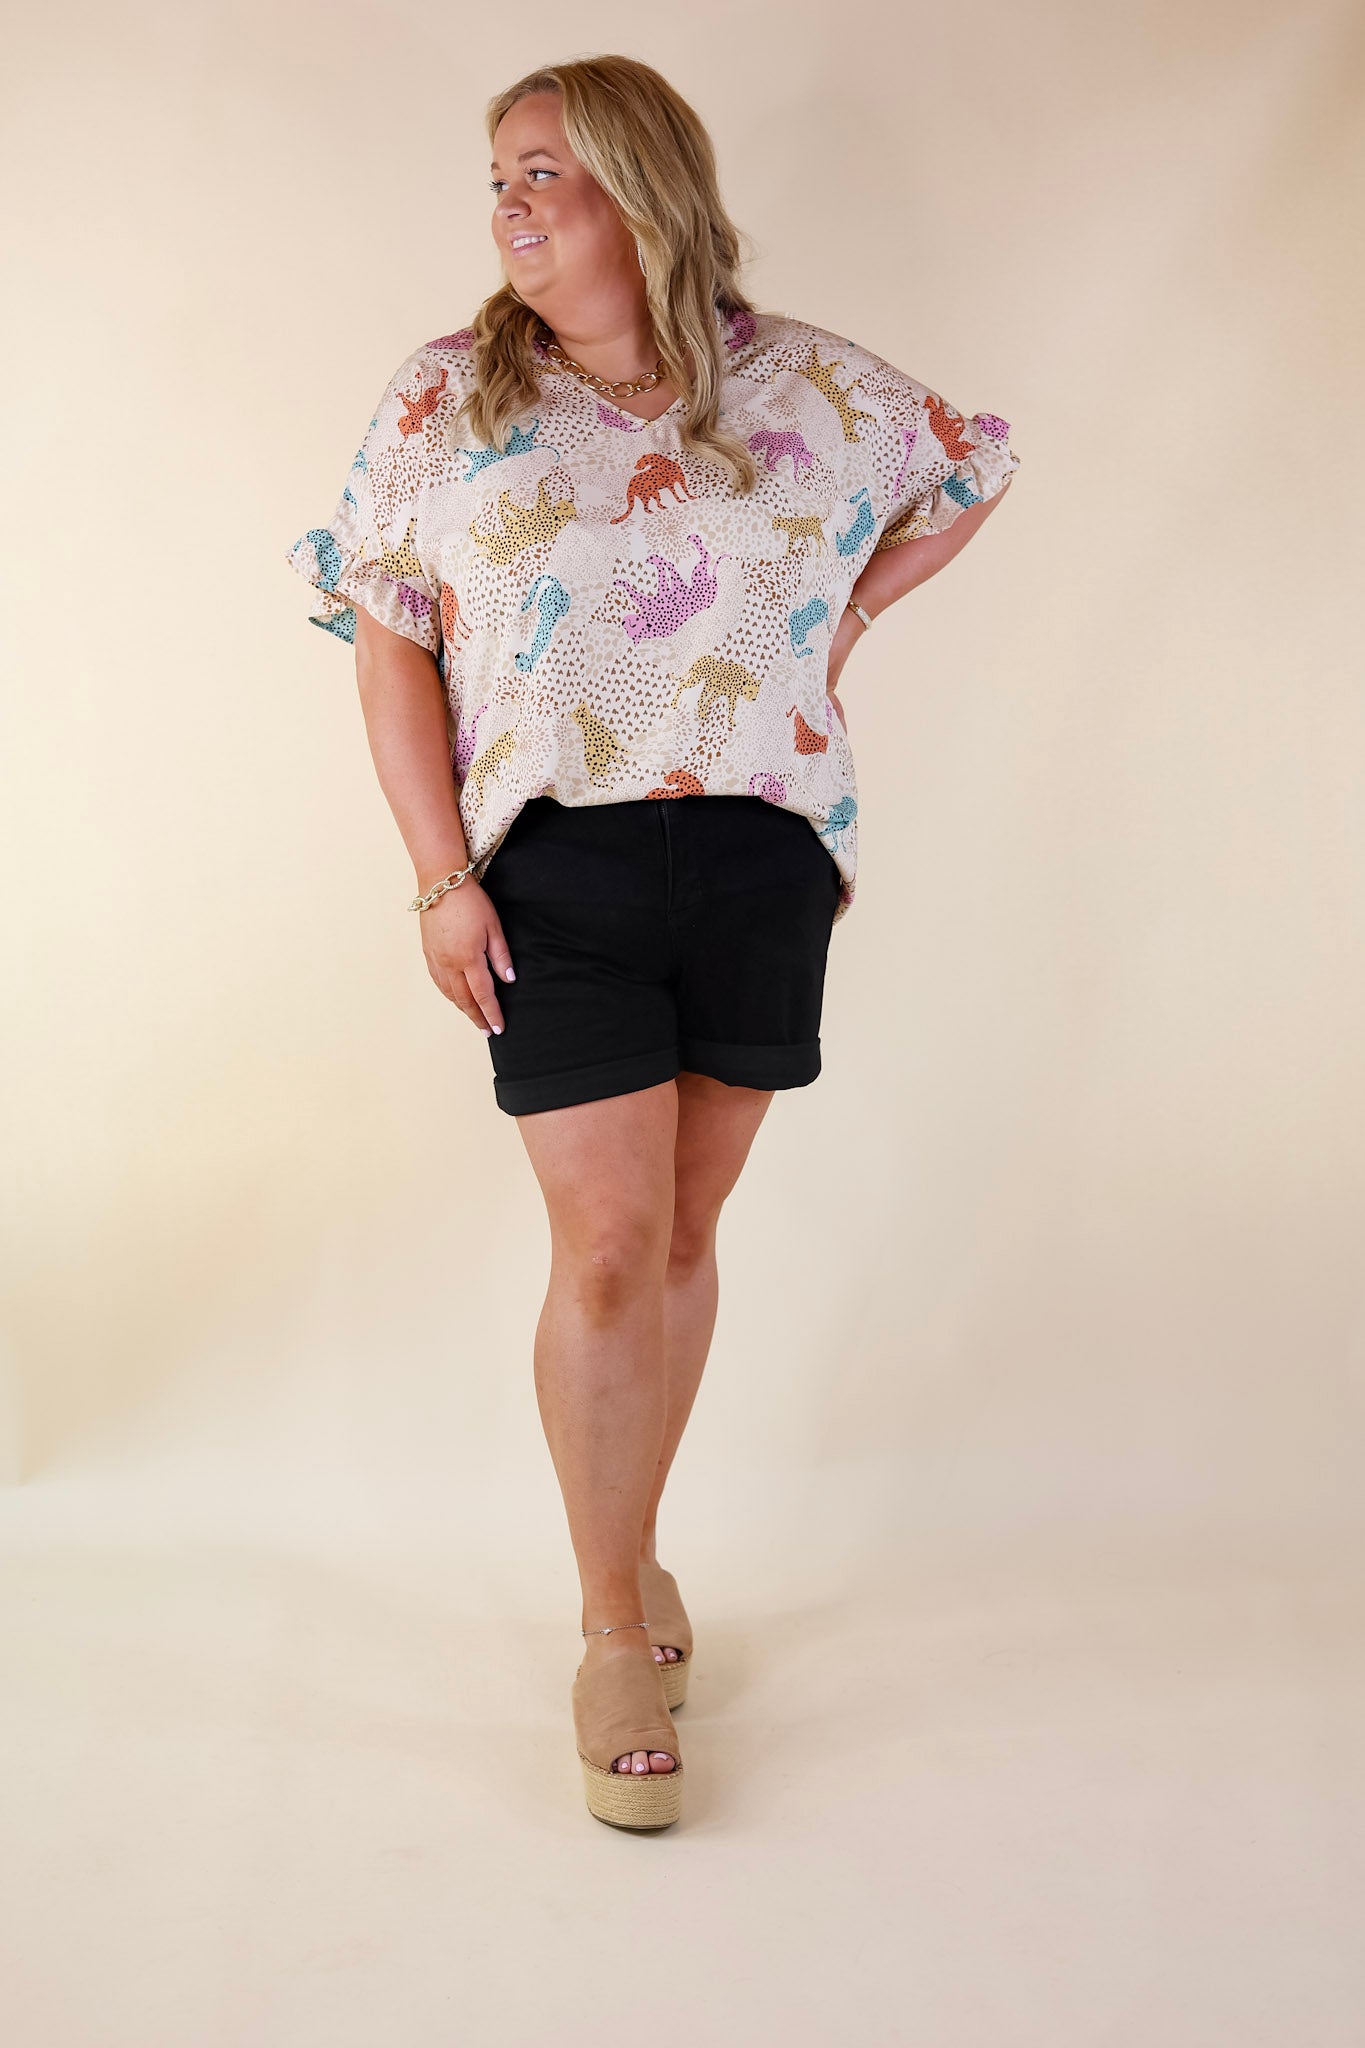 Best Version Cheetah Print V Neck Top with Ruffle Short Sleeves in Beige Mix - Giddy Up Glamour Boutique